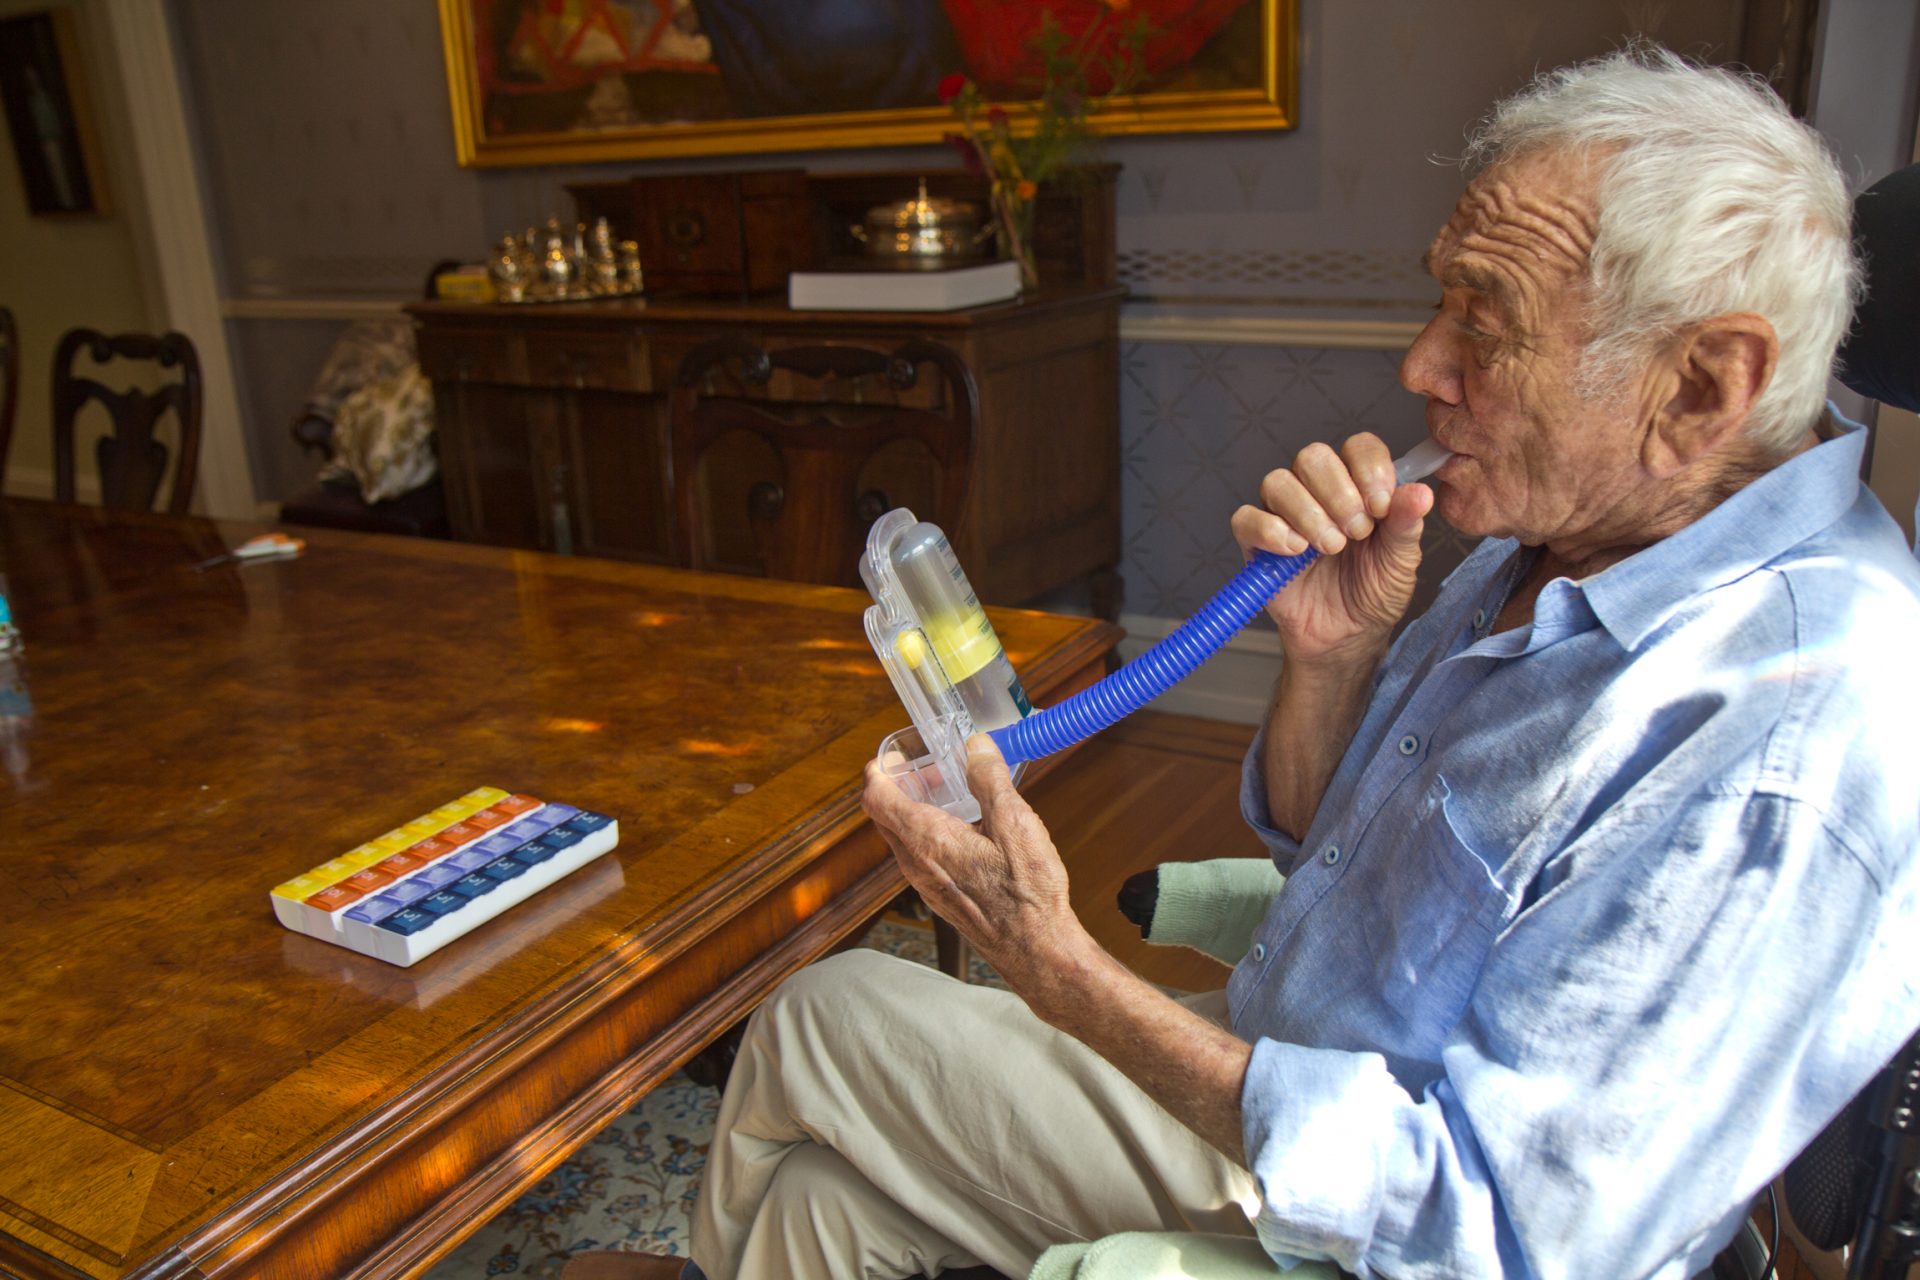 Avram Woidislawsky measures his lung capacity with a spirometer at home after a long hospital stay with COVID-19.